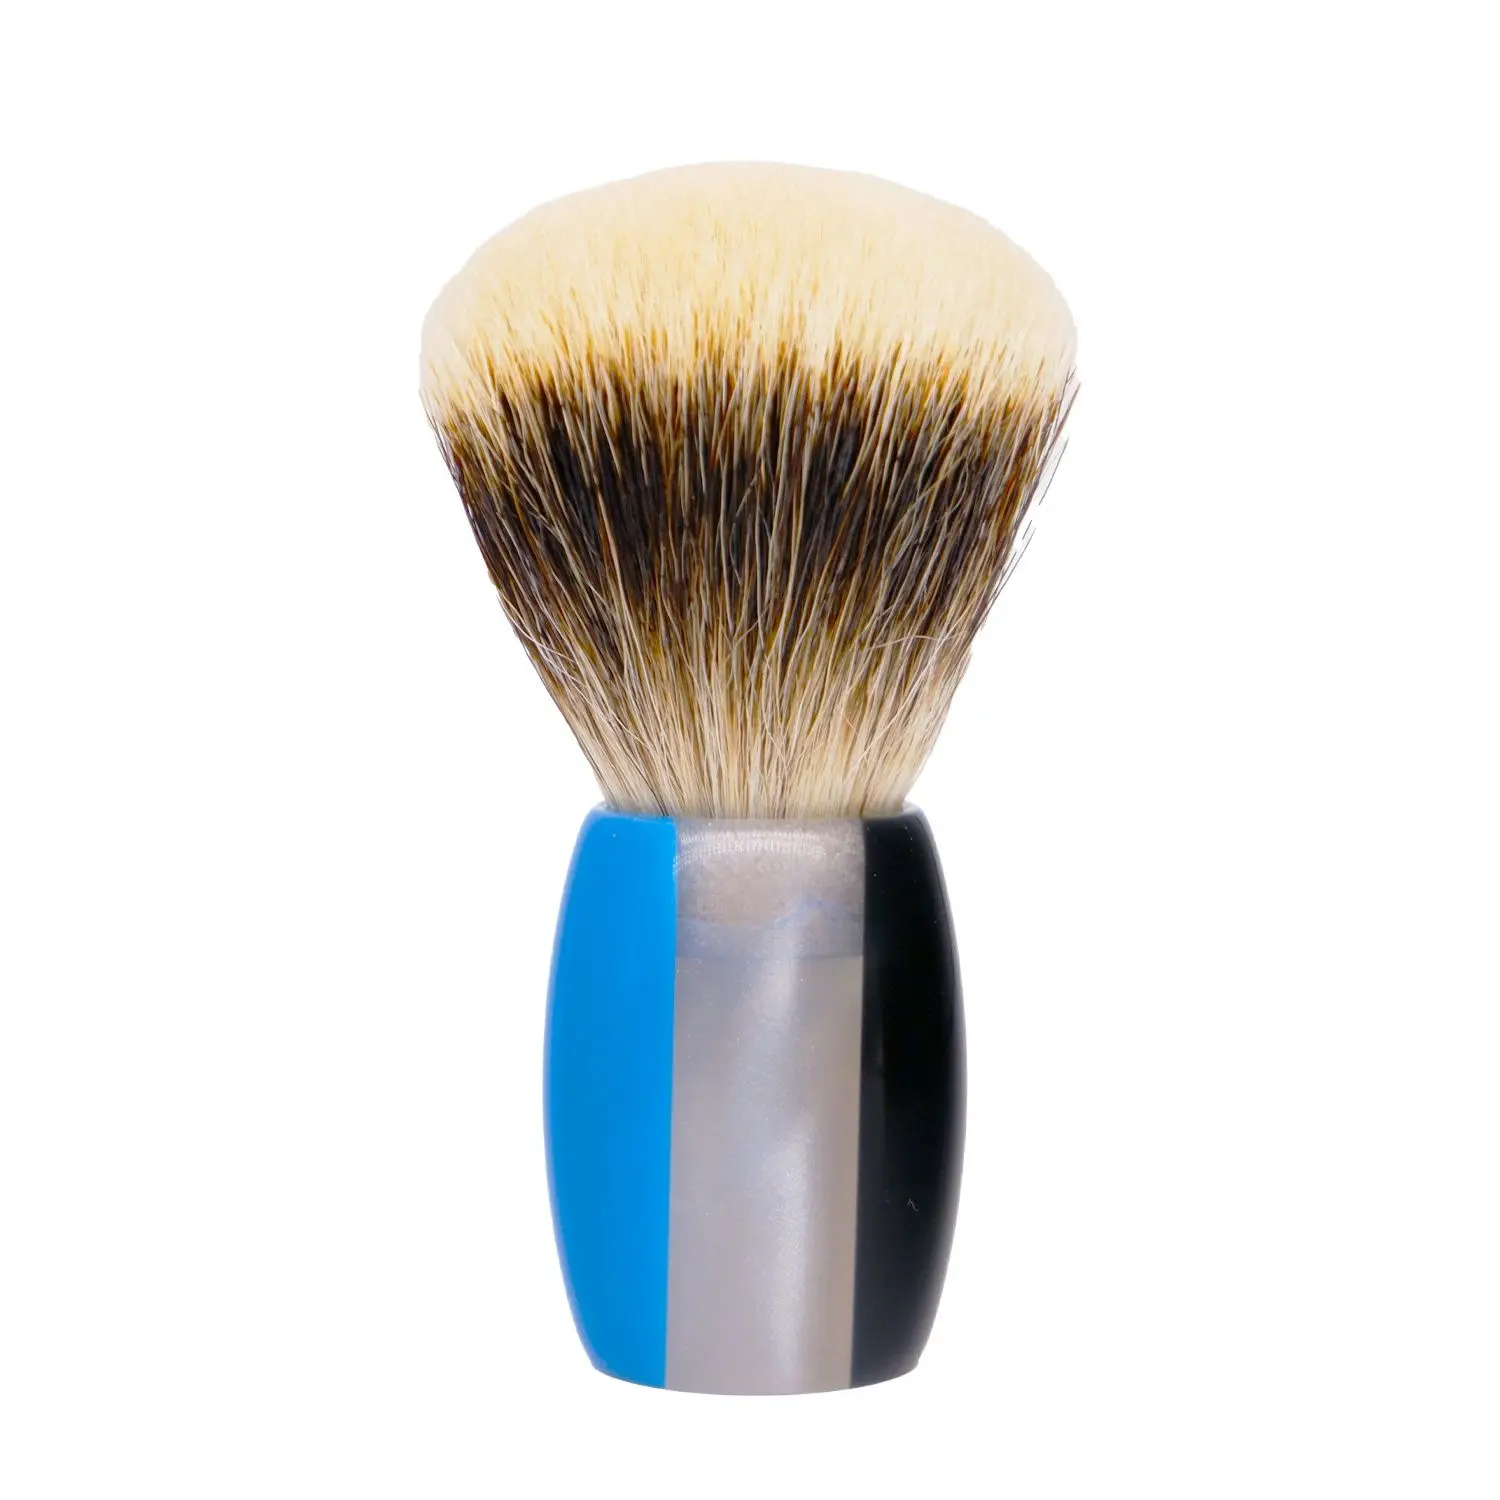 Boti Shaving Brushes Fan Captain Three Band Bdger Hair Knot with Three Patchwork Color Handle Beard Cleaning Kit